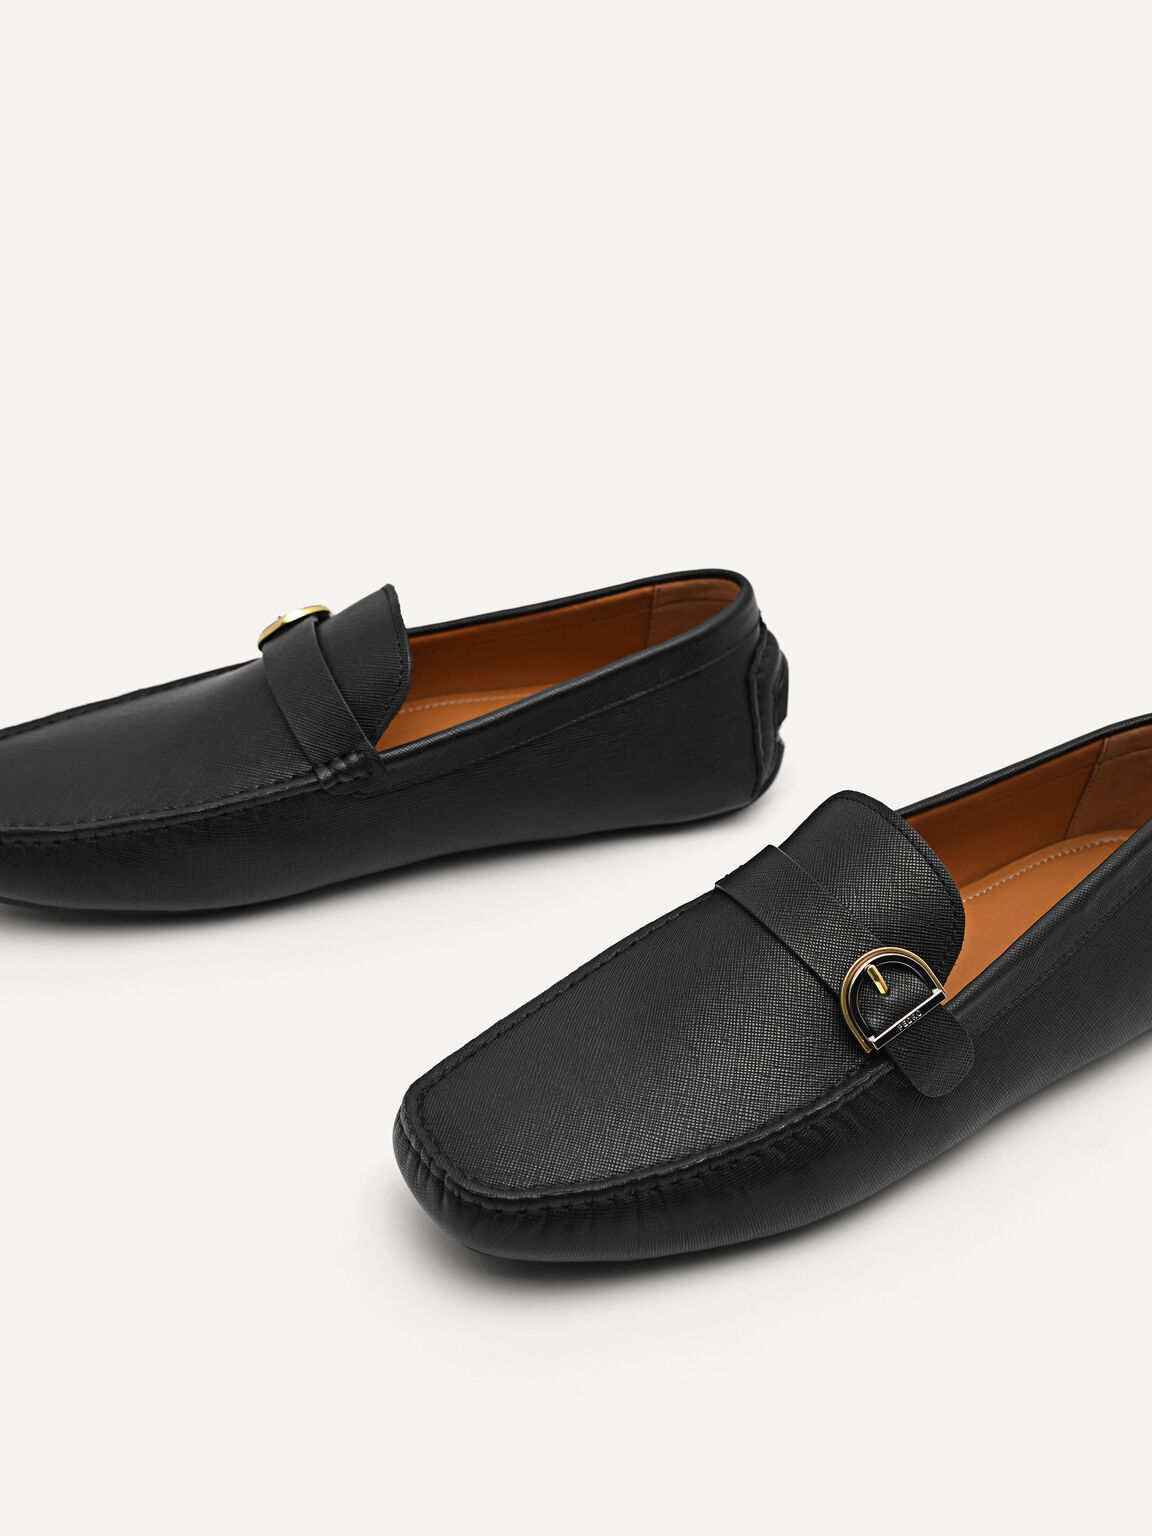 Leather Moccasins with Buckle Detail, Black